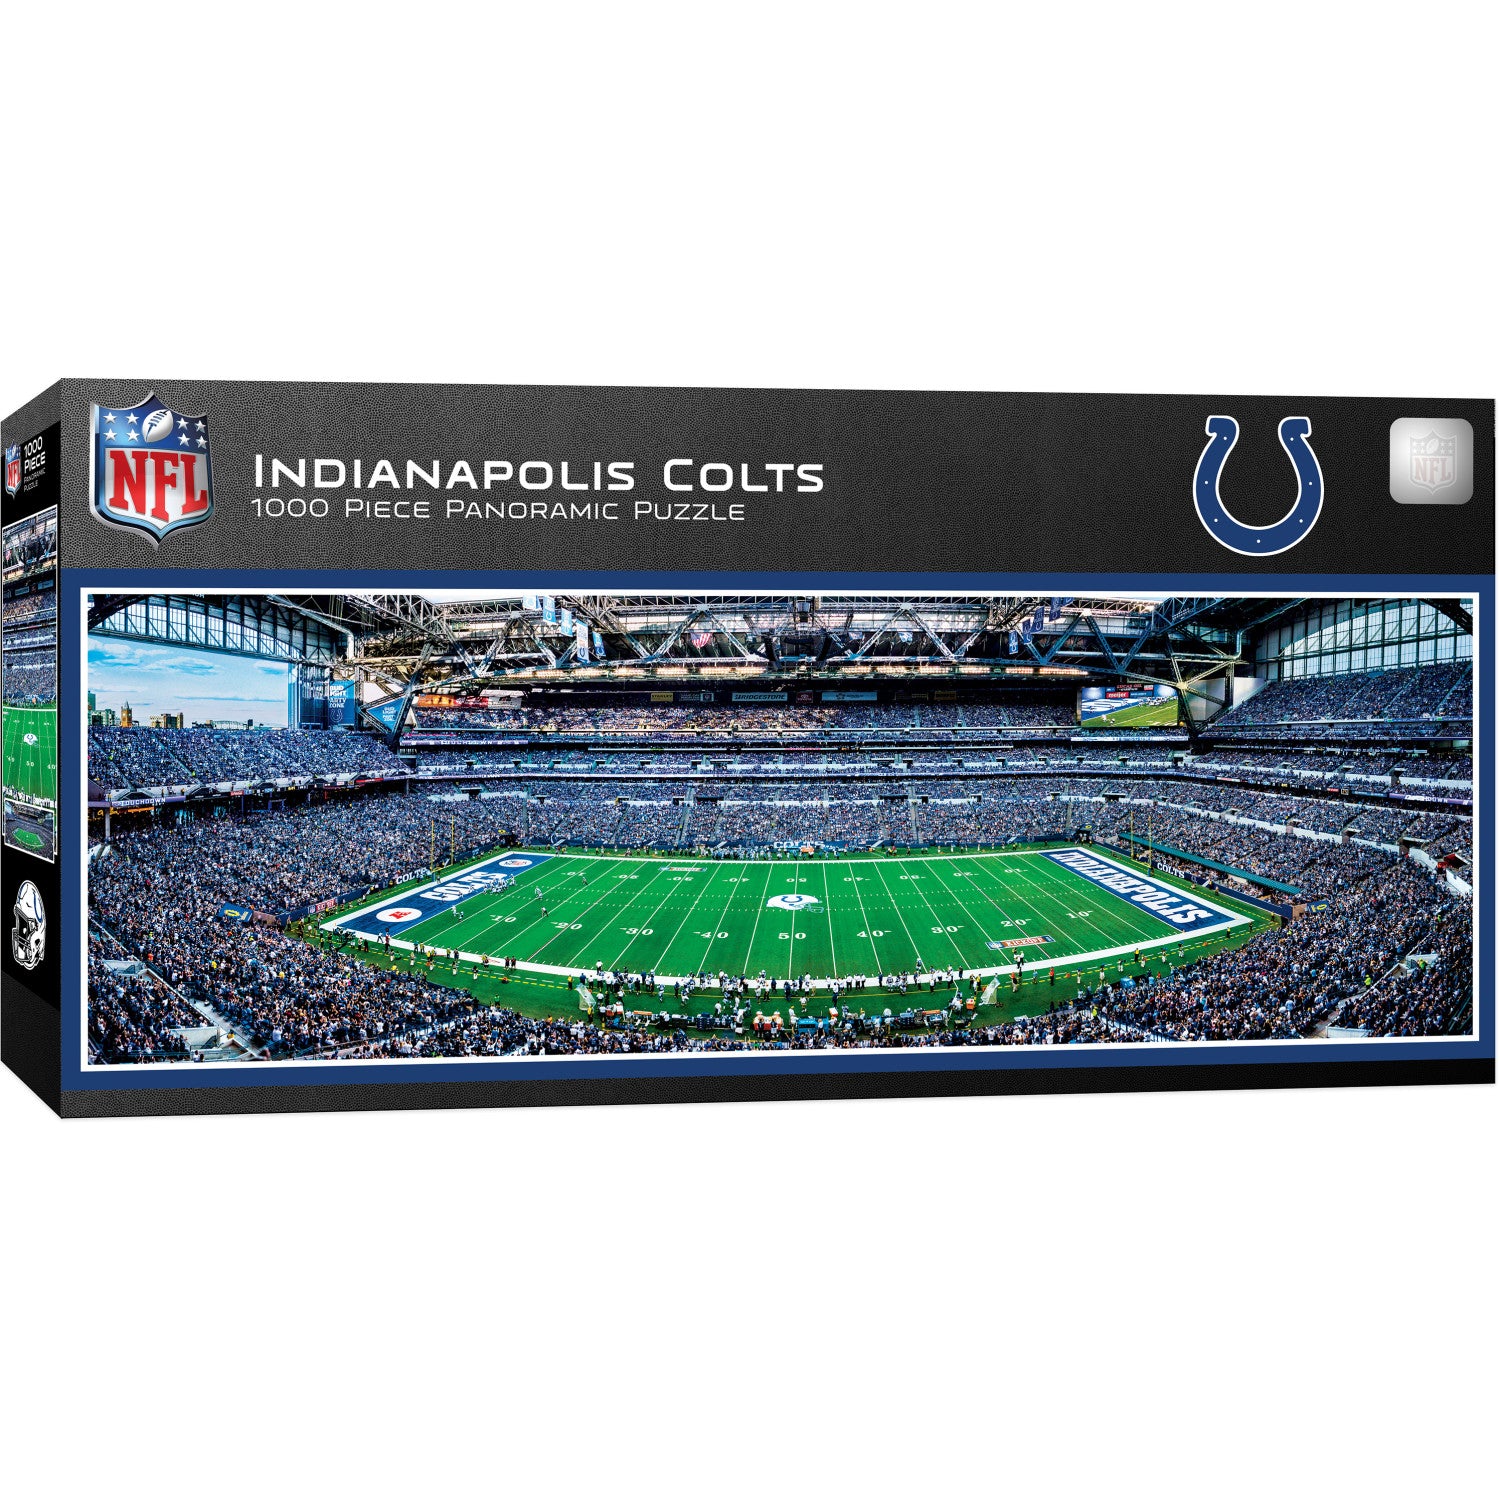 Indianapolis Colts - 1000 Piece Panoramic Jigsaw Puzzle